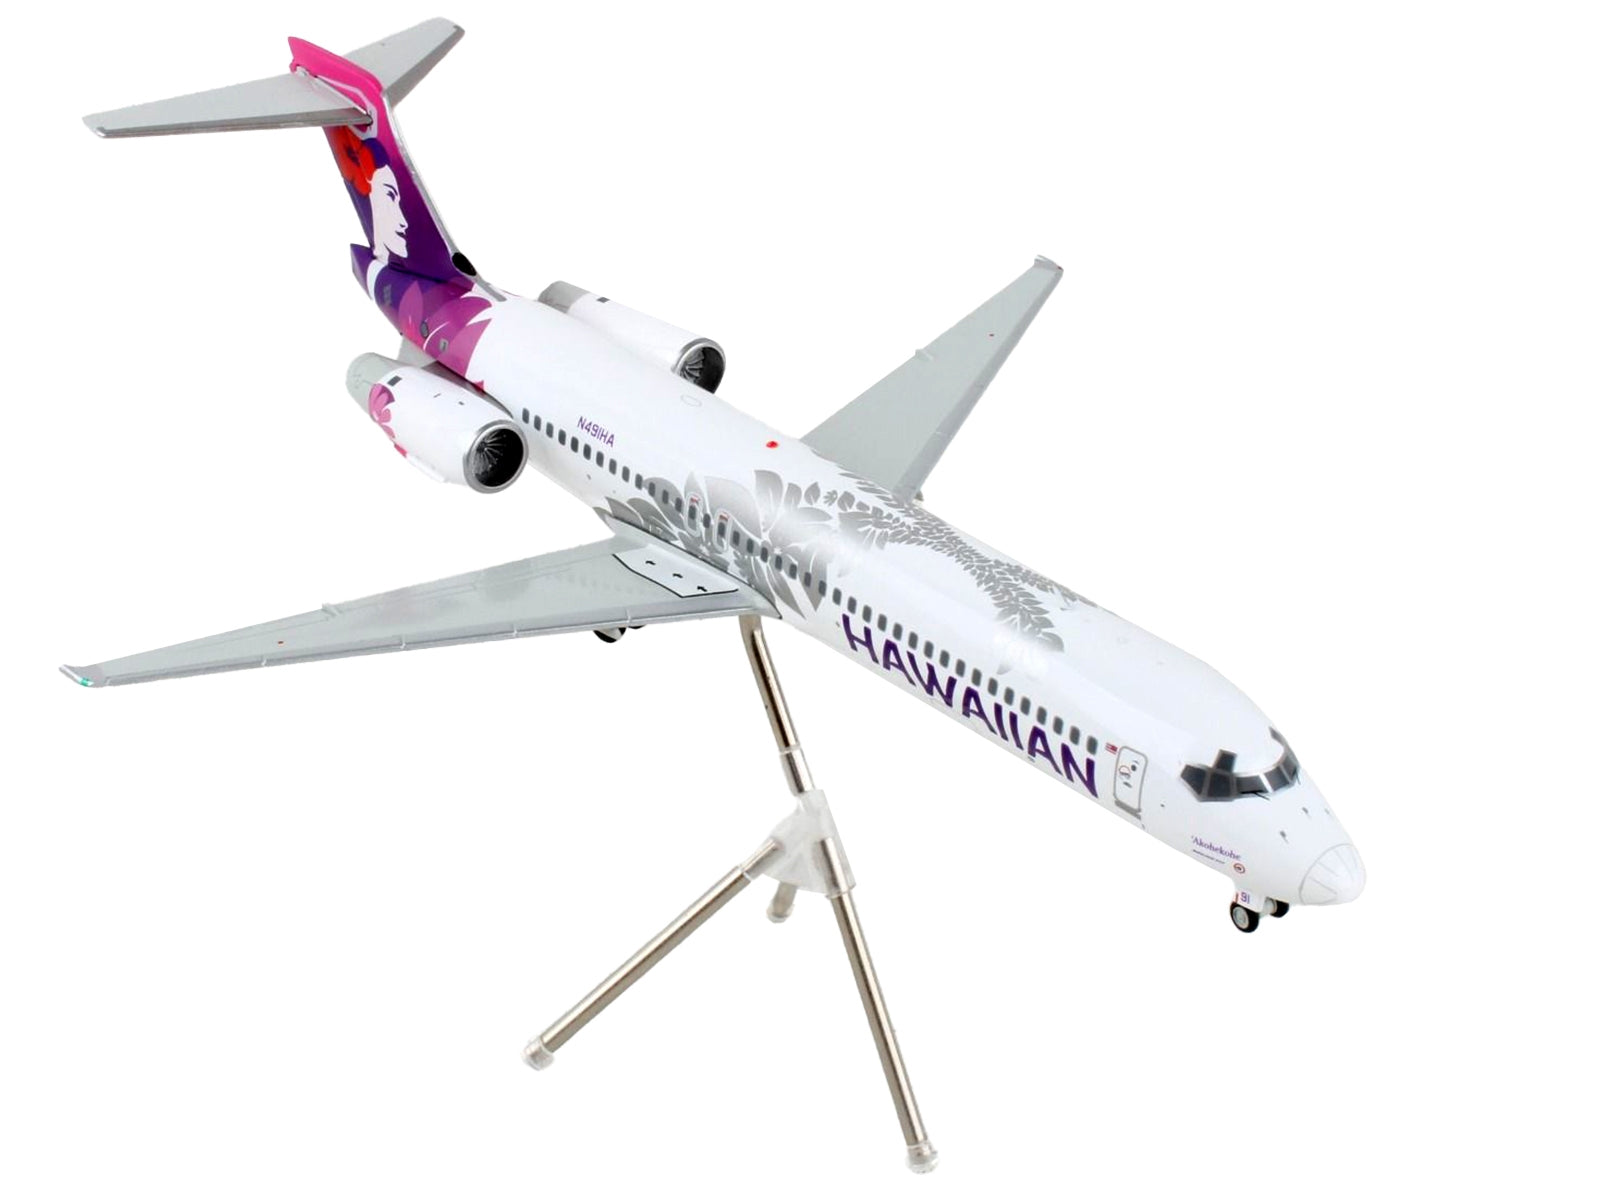 Boeing 717-200 Commercial Aircraft "Hawaiian Airlines" White with Purple Tail "Gemini 200" Series 1/200 Diecast Model Airplane by GeminiJets